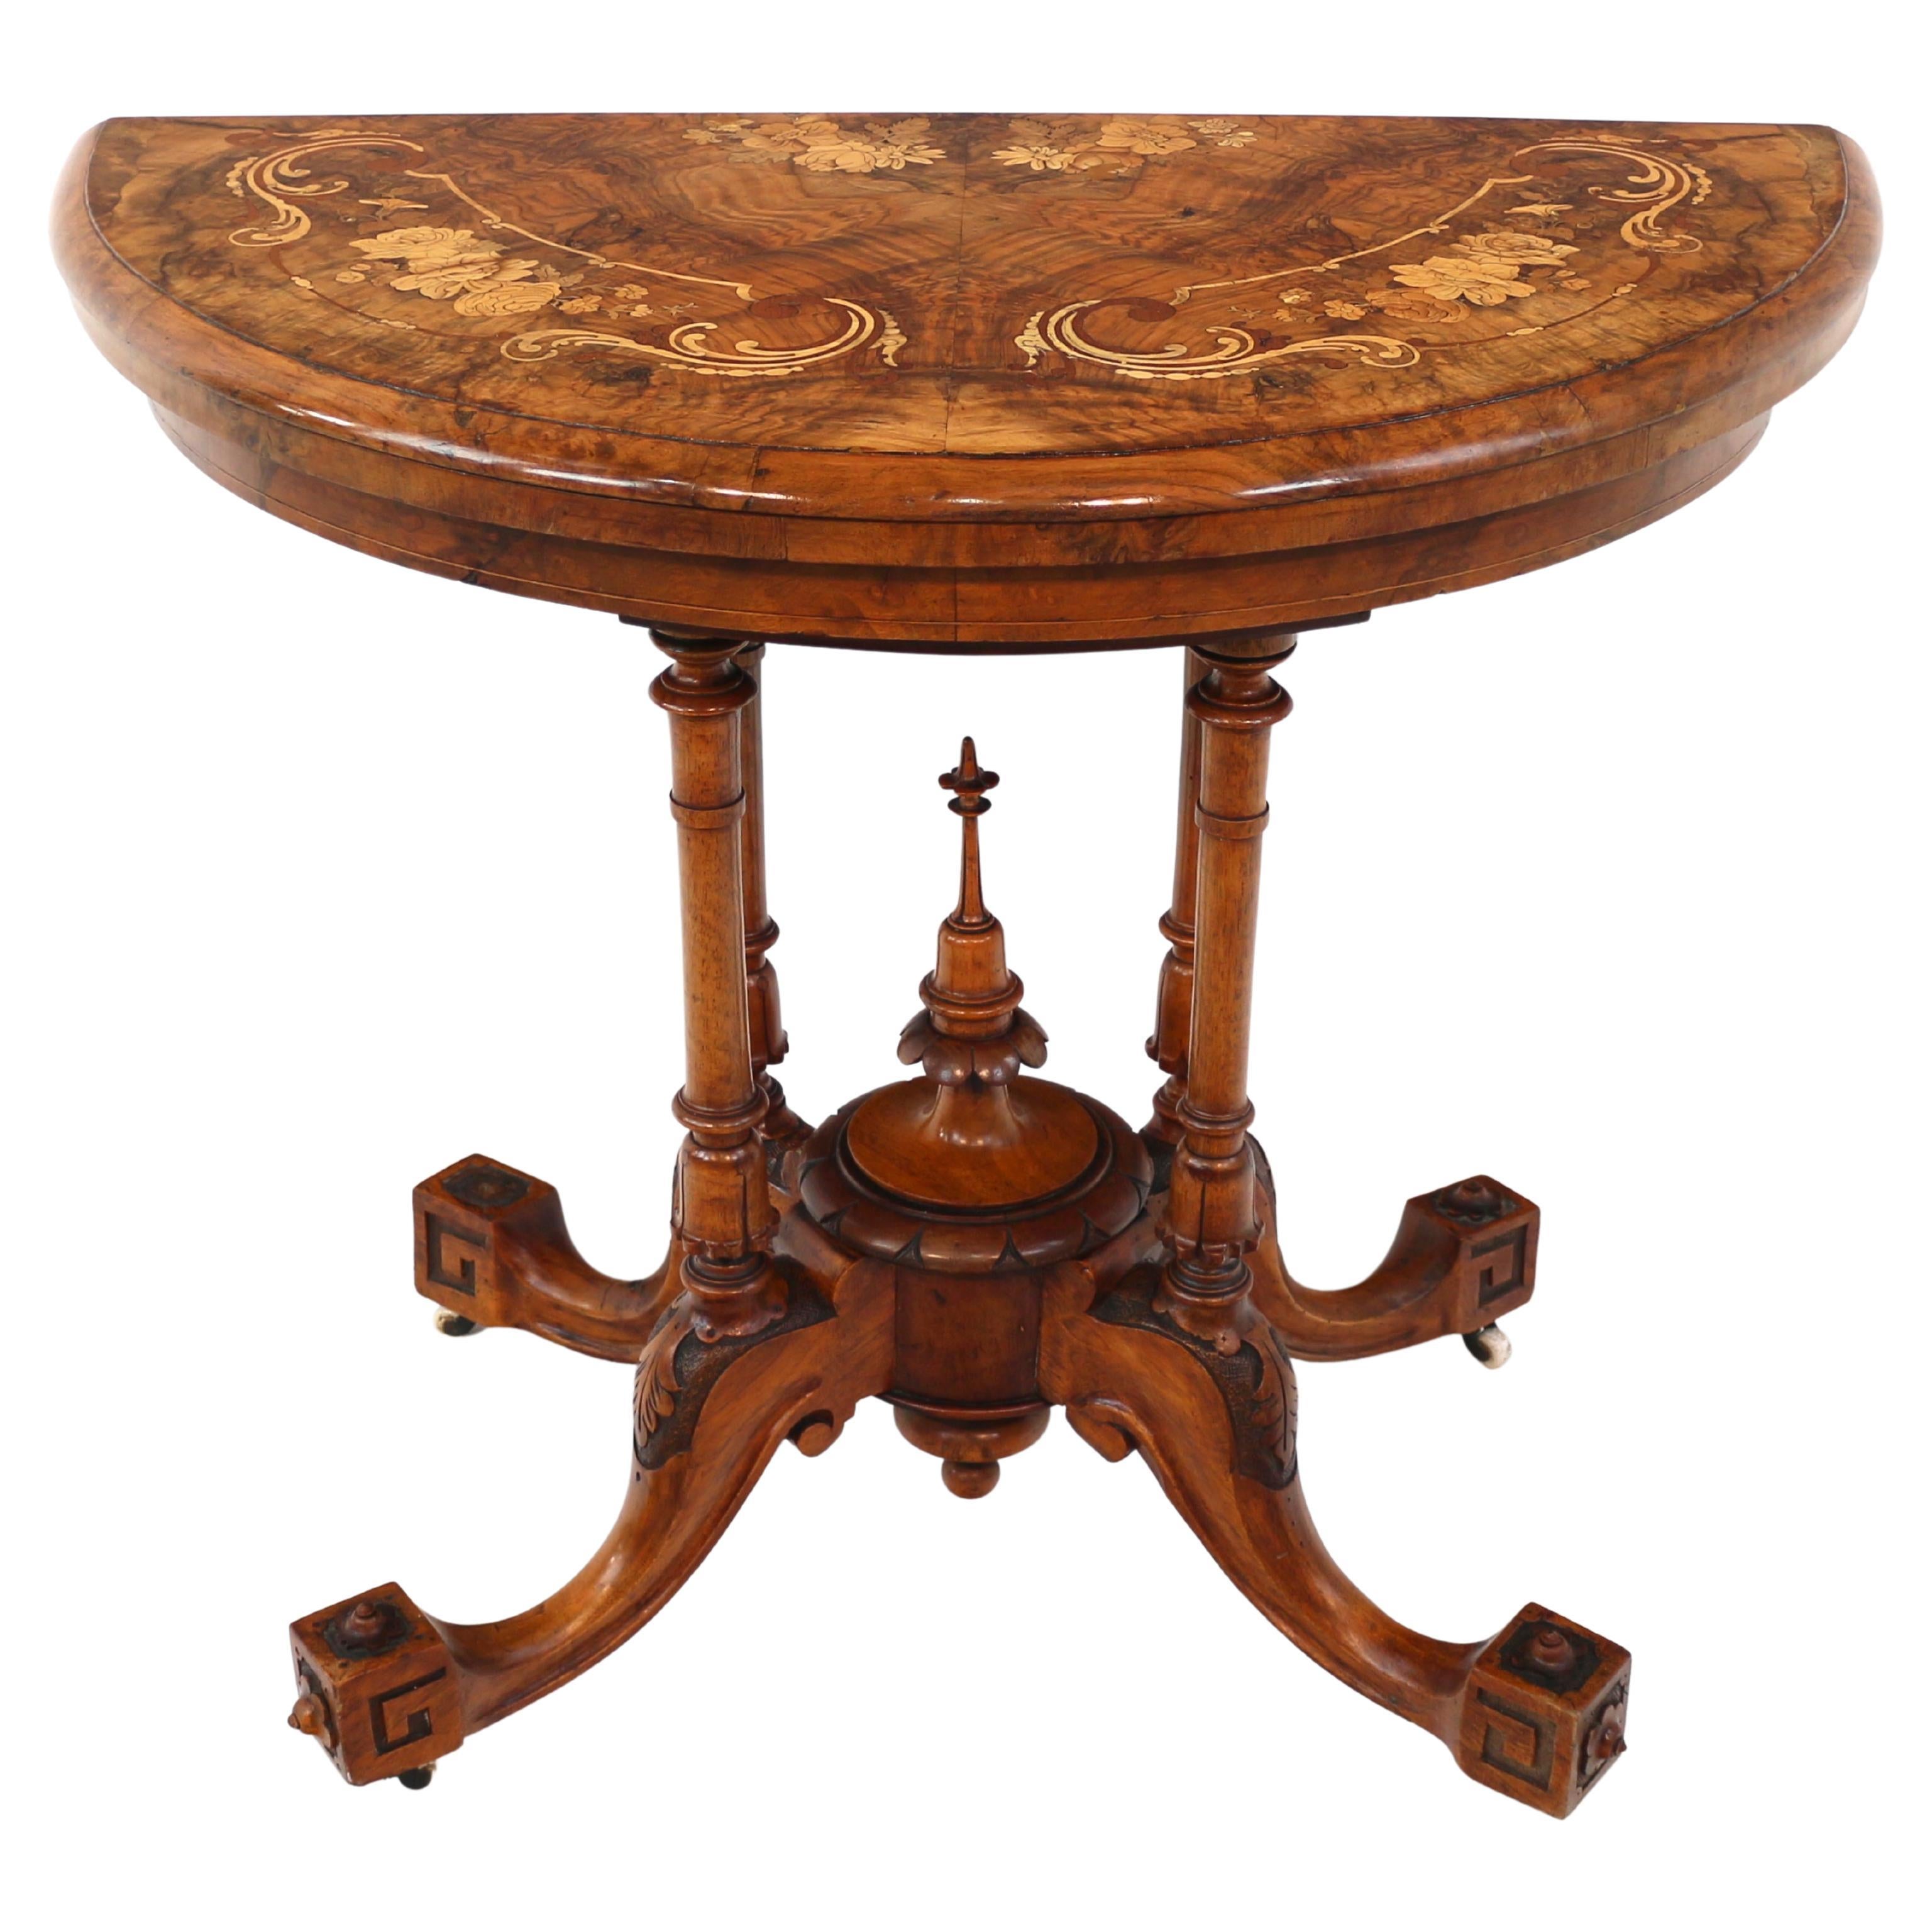 Antique English Victorian Burr Walnut & Floral Marquetry Demi-Lune Card Table For Sale